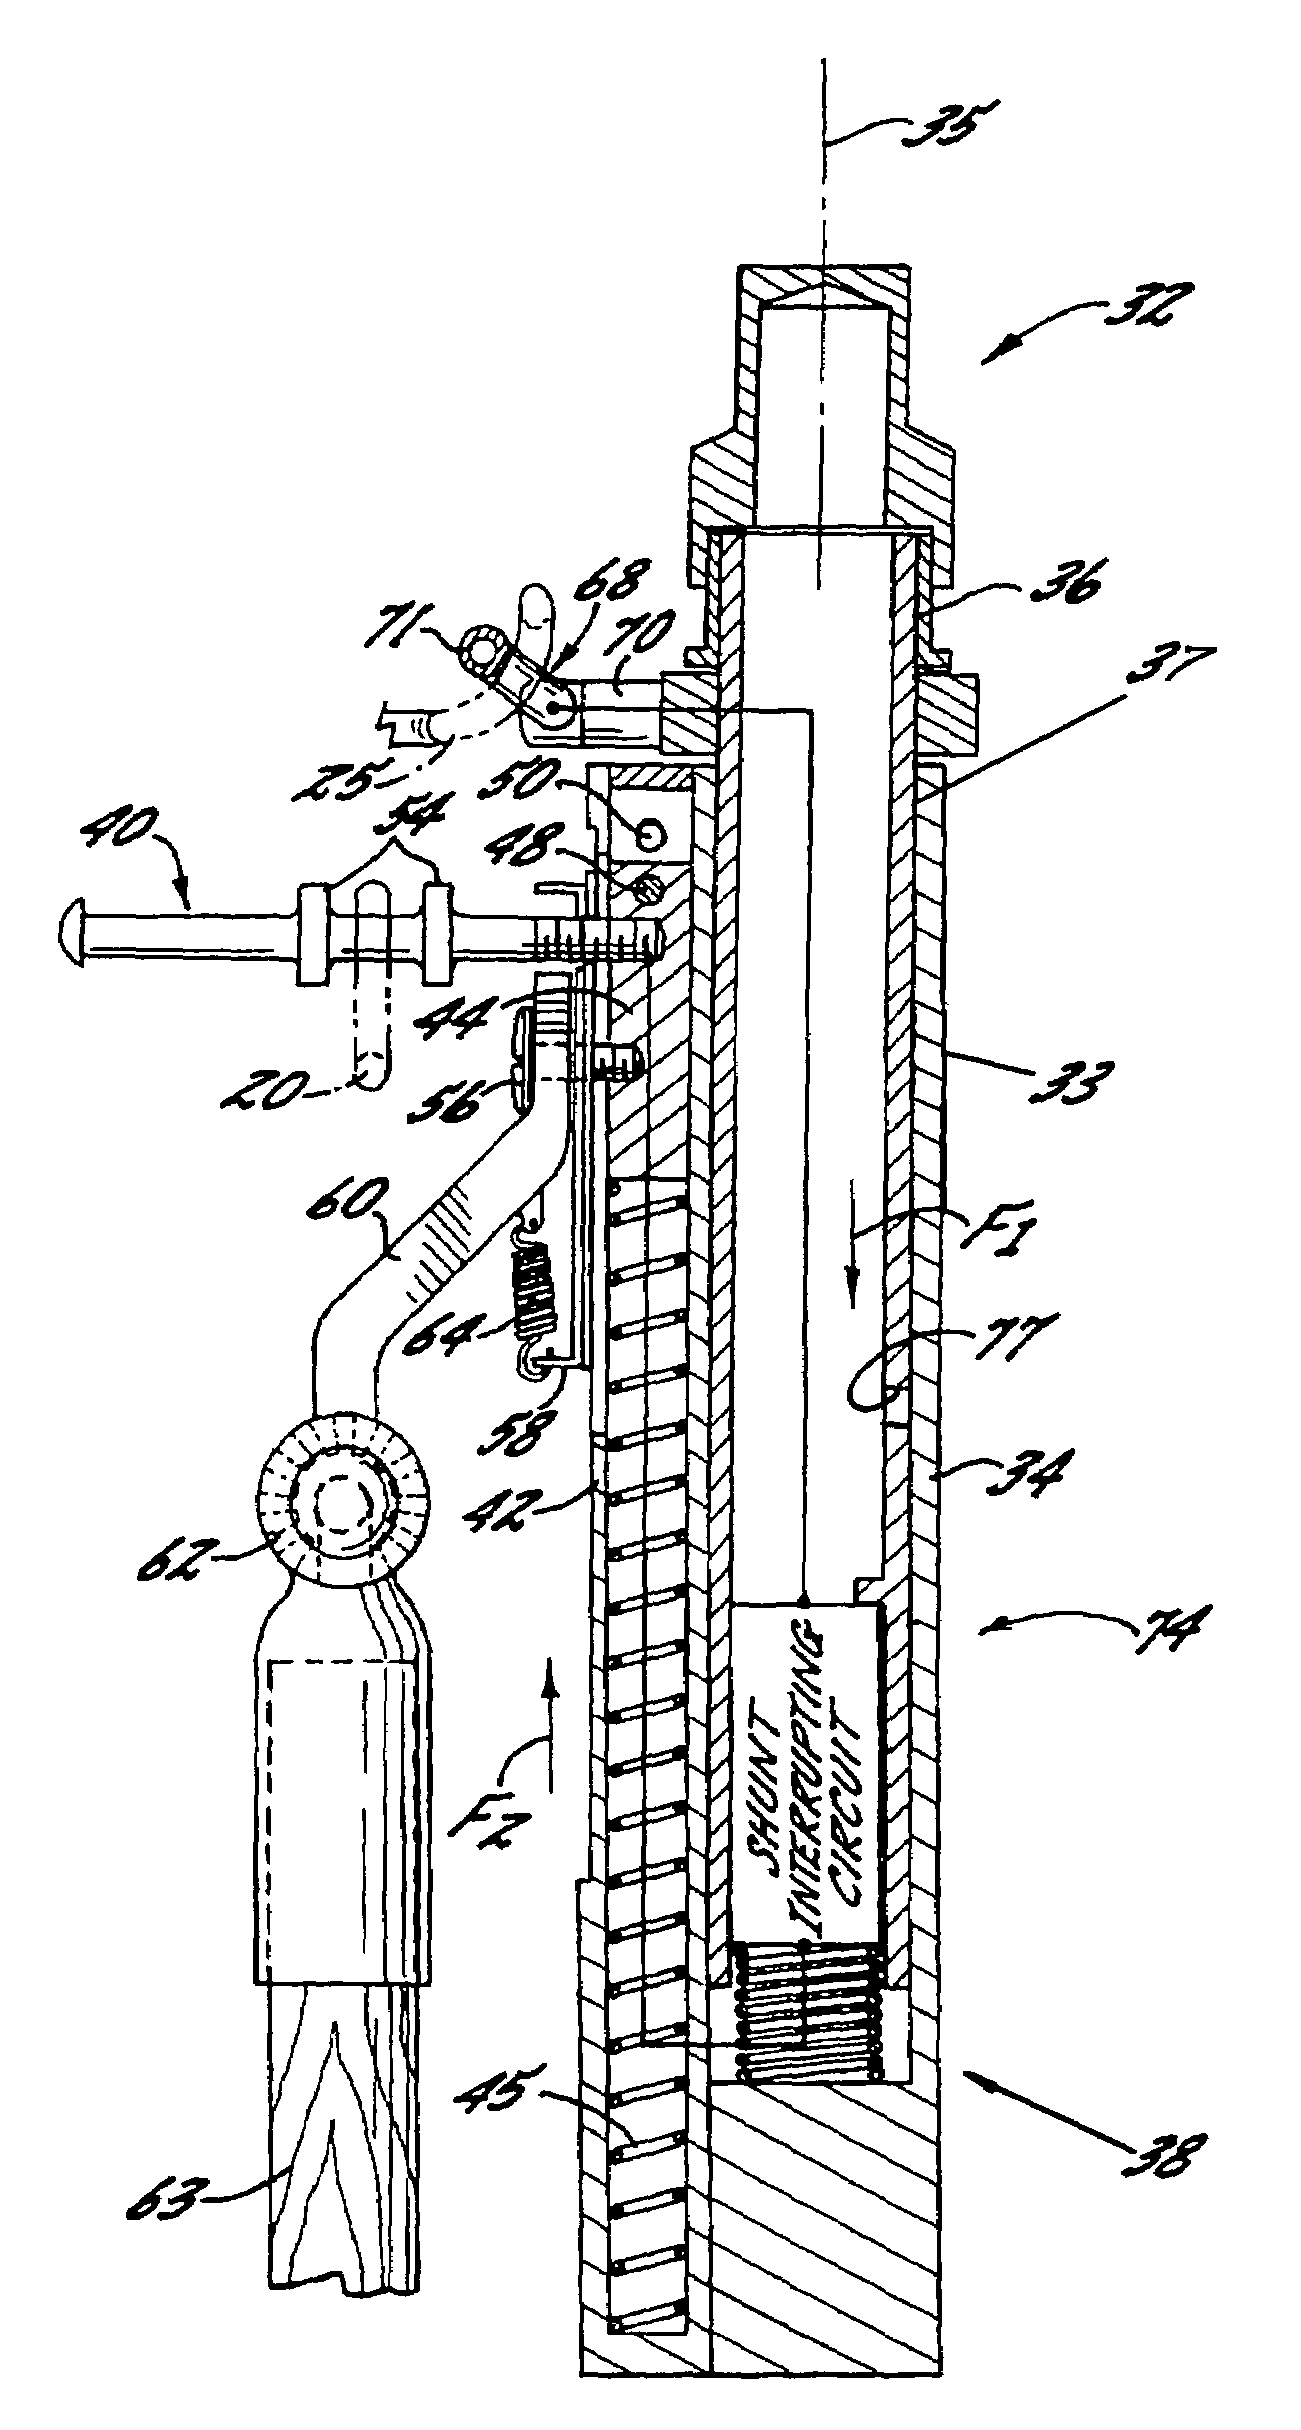 Interrupting apparatus having operations counter and methods of forming and using same